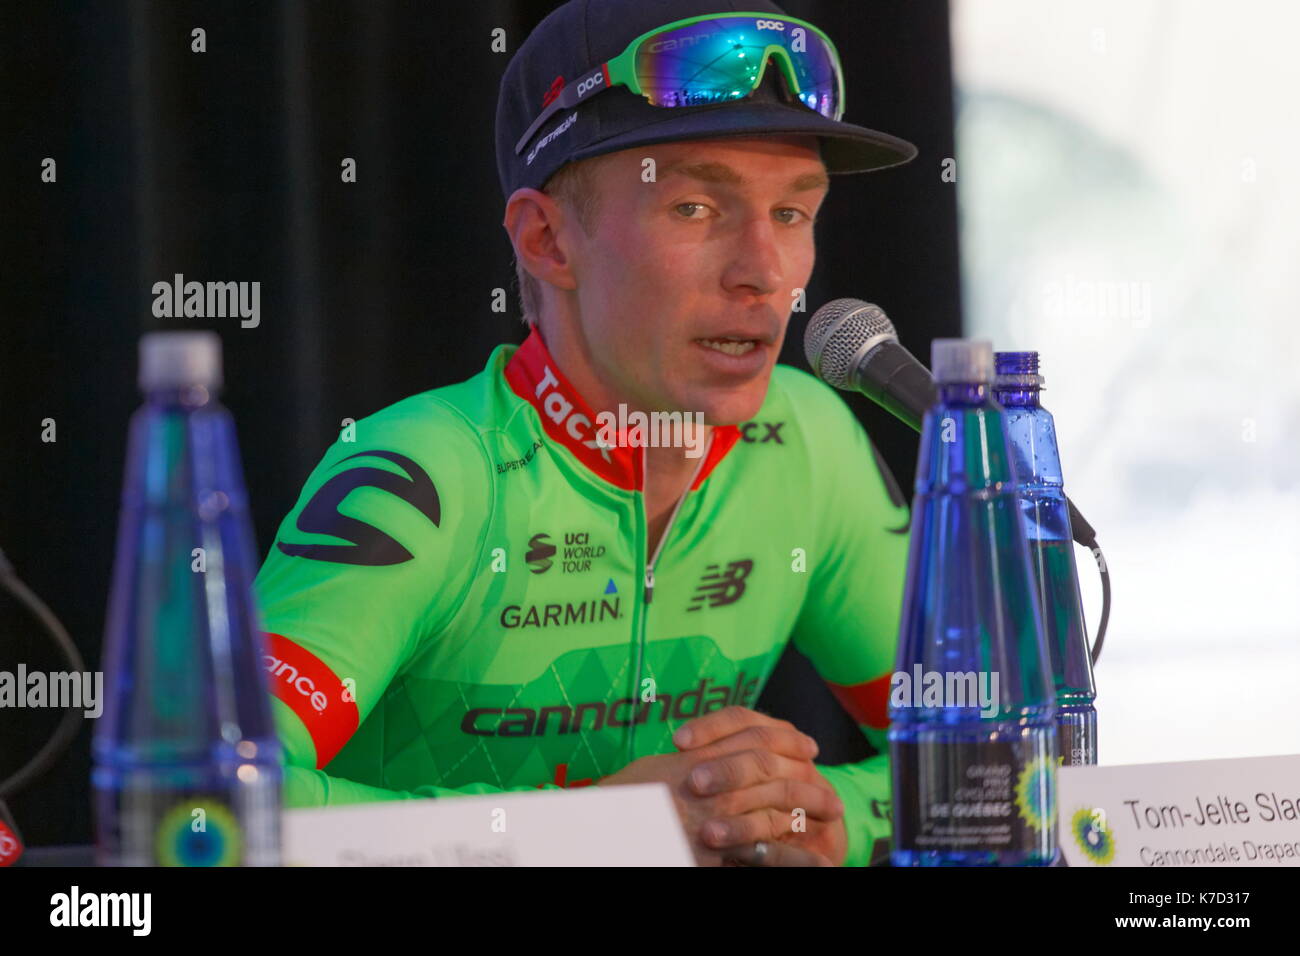 Montreal, Canada. 10/09/2017. Tom-Jelte Slagter of Cannondale Drapac Pro Cycling Team USA, l at the post race news conference following the Grand Prix Stock Photo